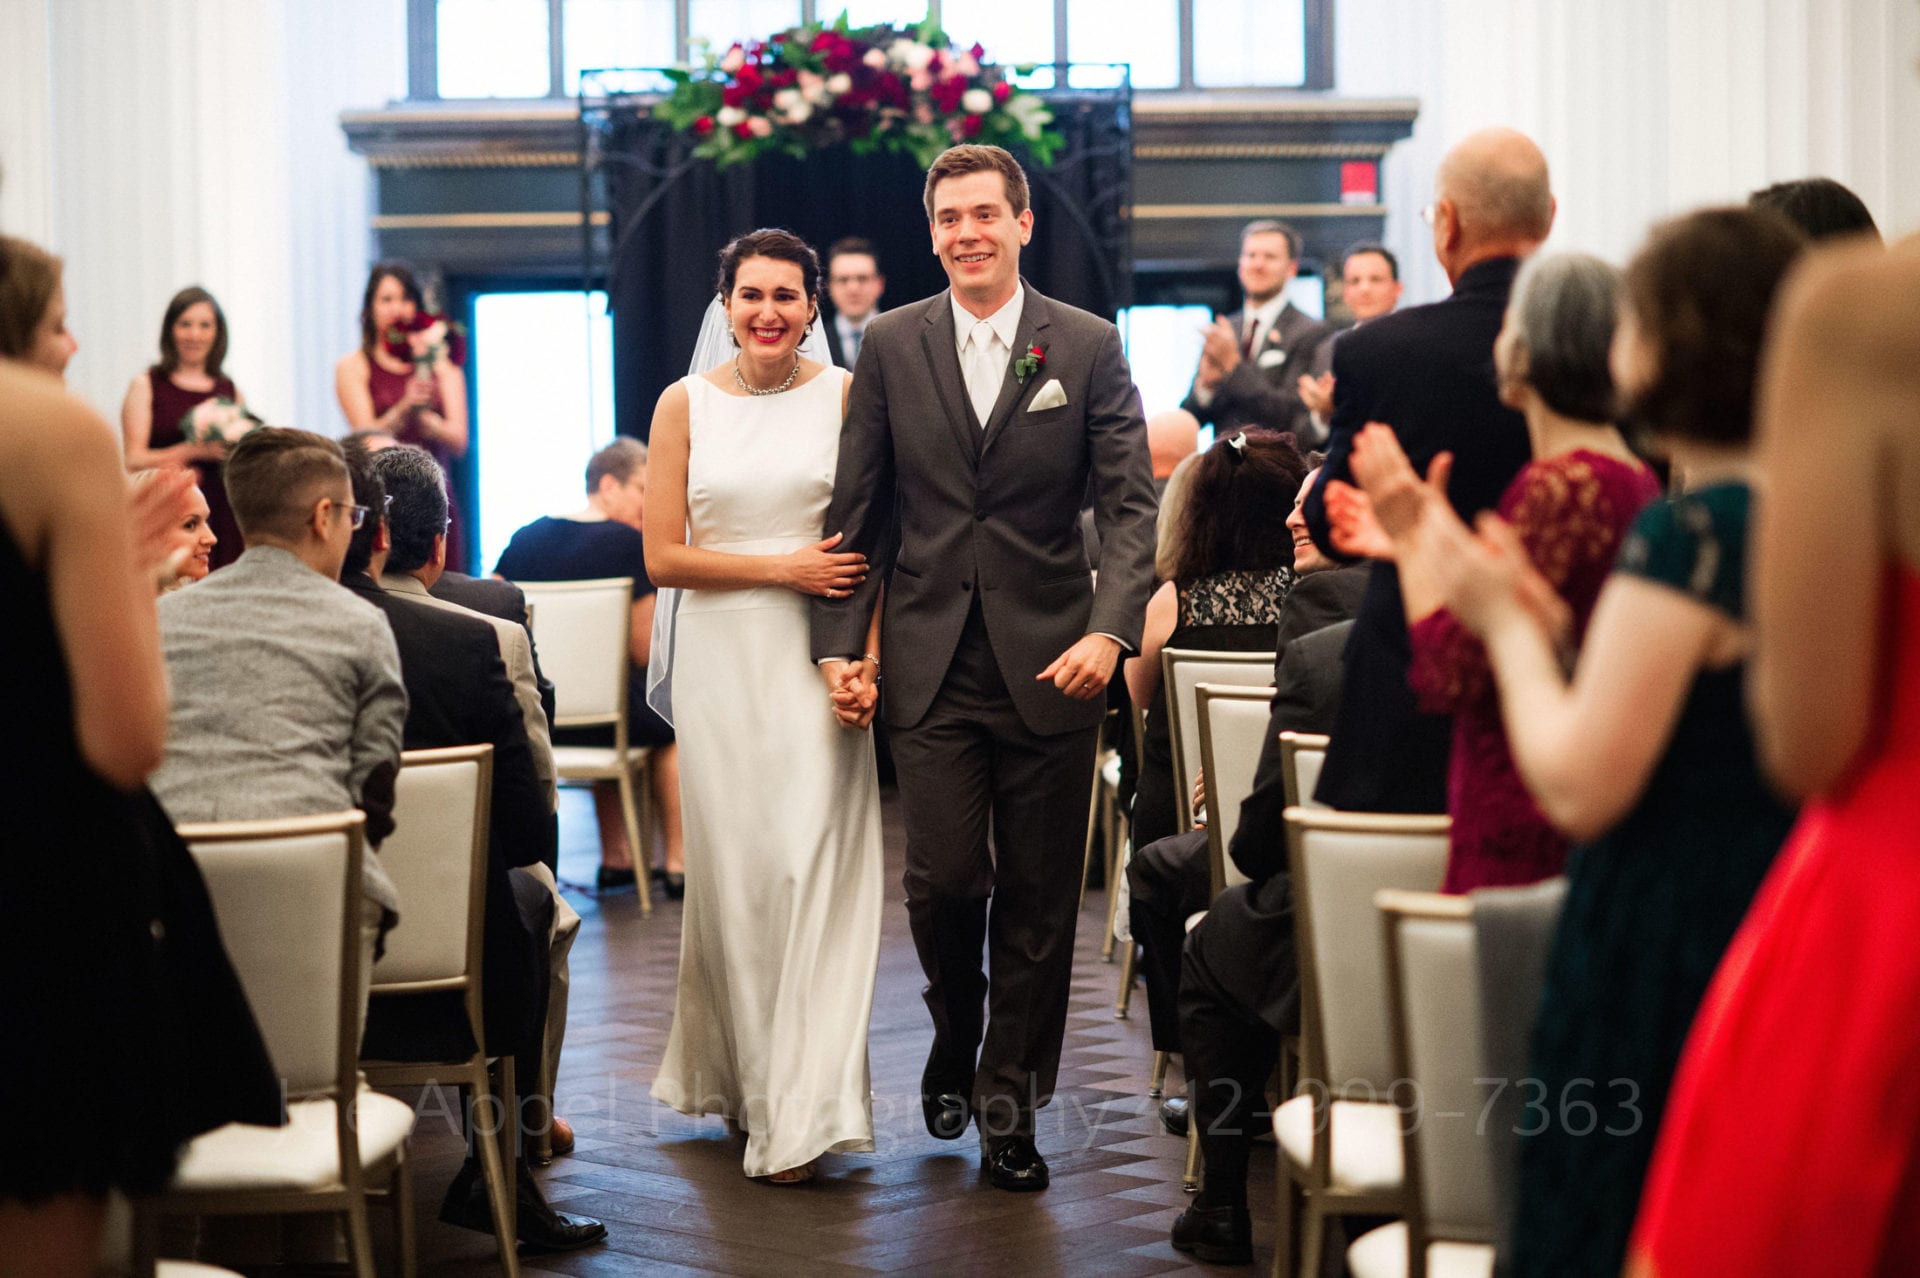 guests applaud a bride and groom as they walk away from their chuppah